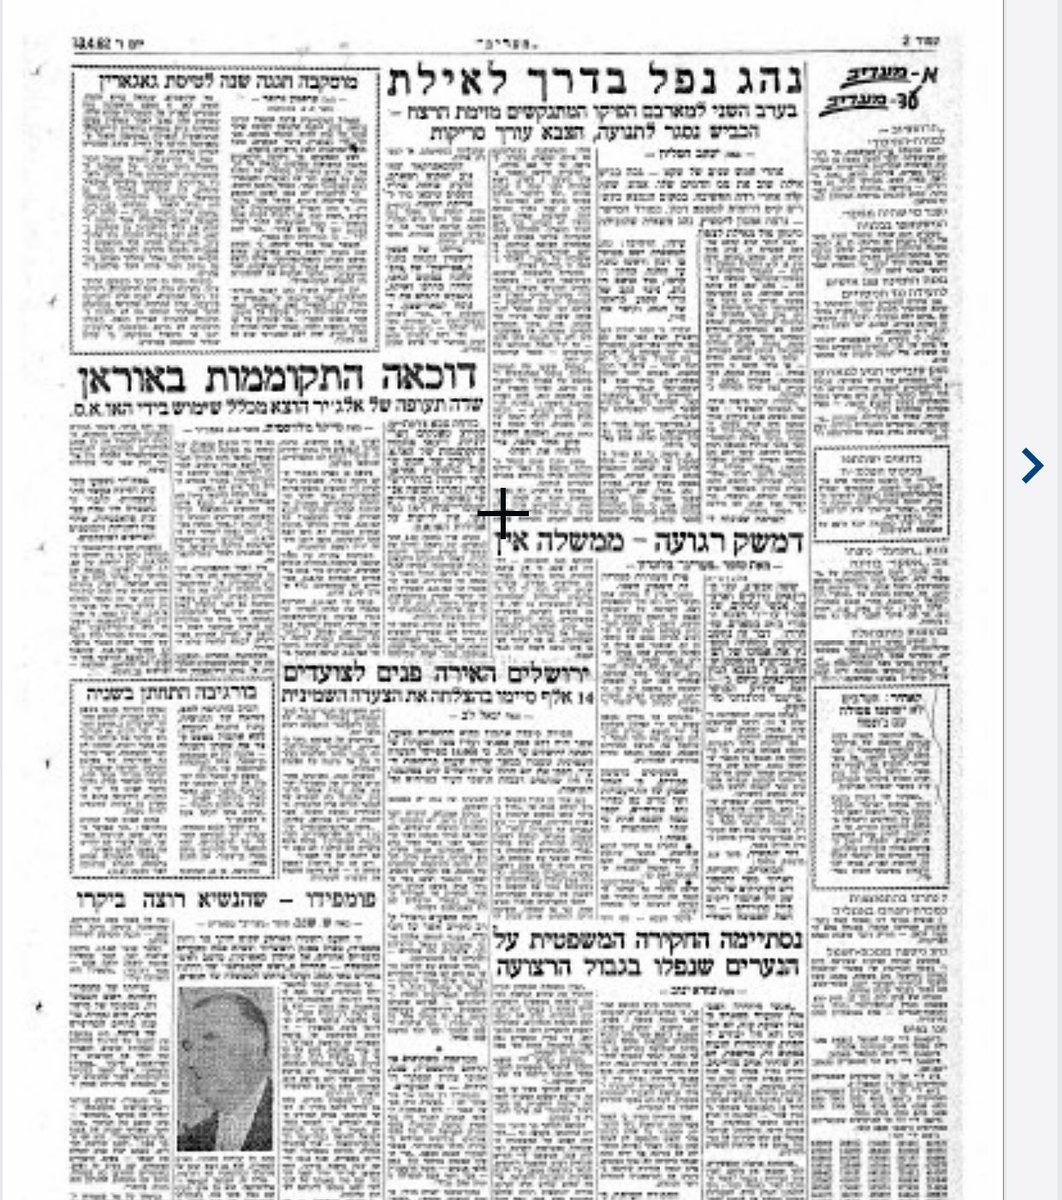 1. On April 12th 1962 , 59 years ago , Palestinian terrorists which infiltrated from the Sinai peninsula had opened fire on Israeli civilian vehicles south to Mitzpe Ramon.